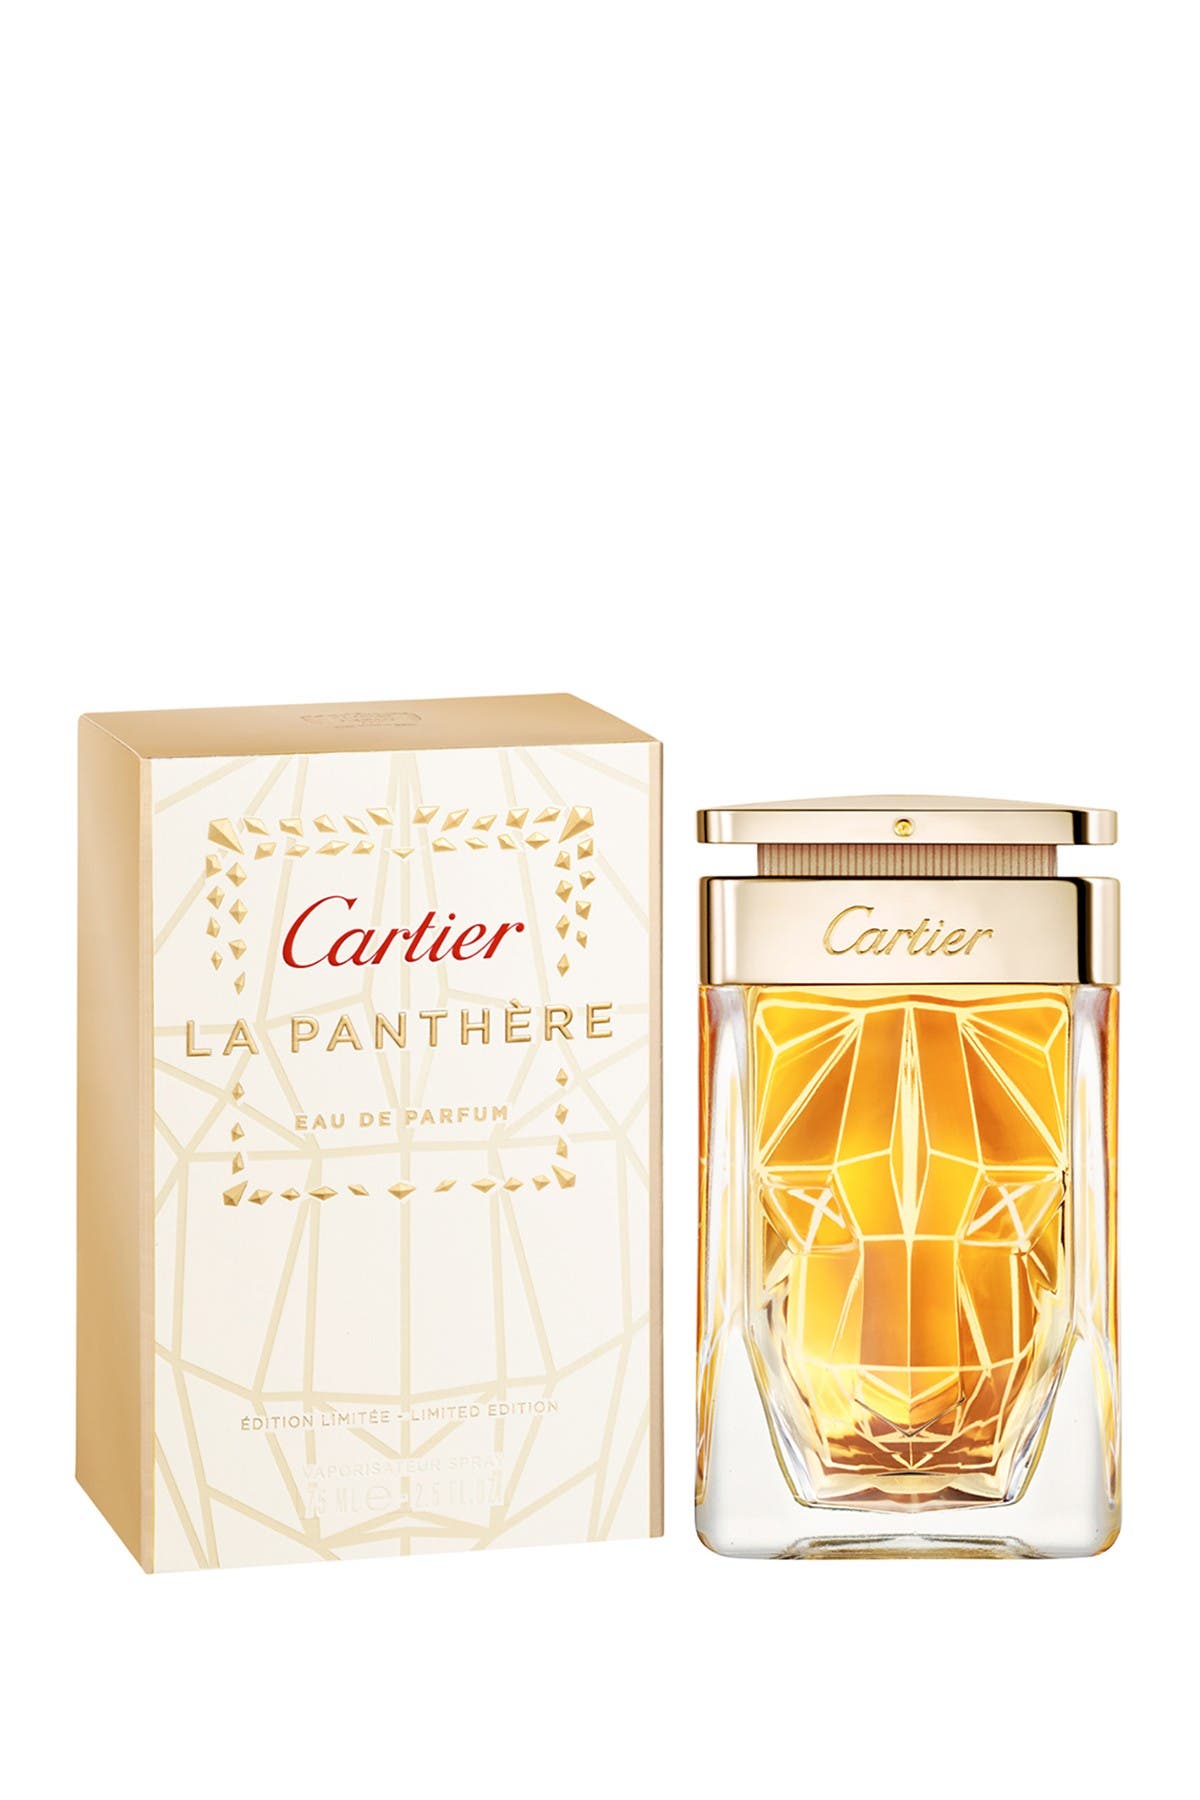 la panthere by cartier